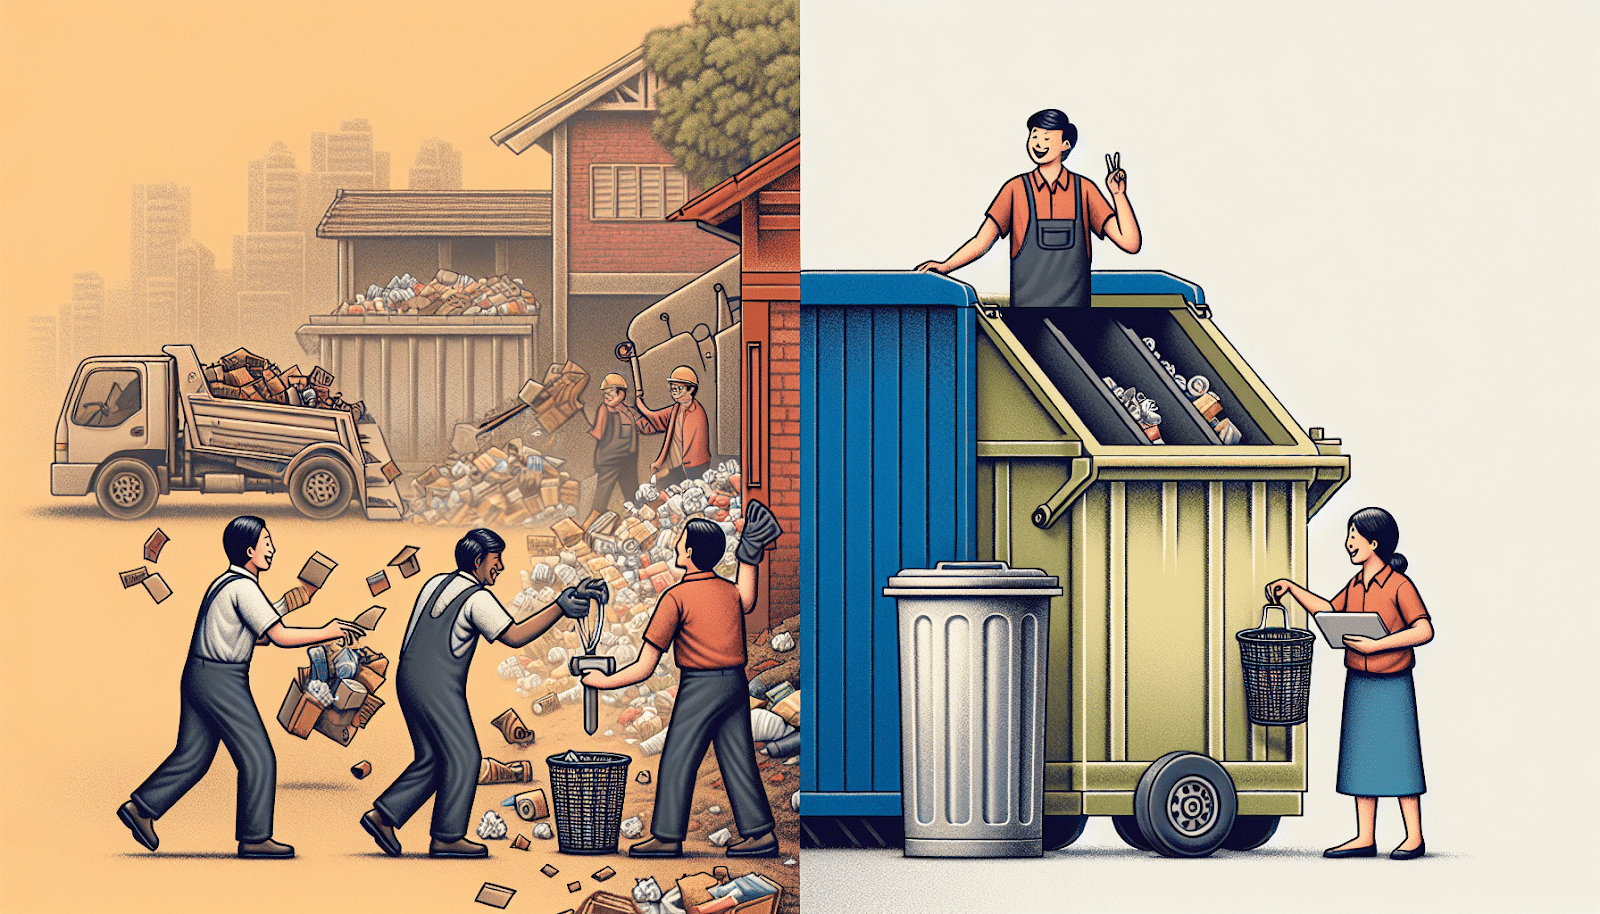 Comparison between self dumping dumpsters and traditional dumpsters